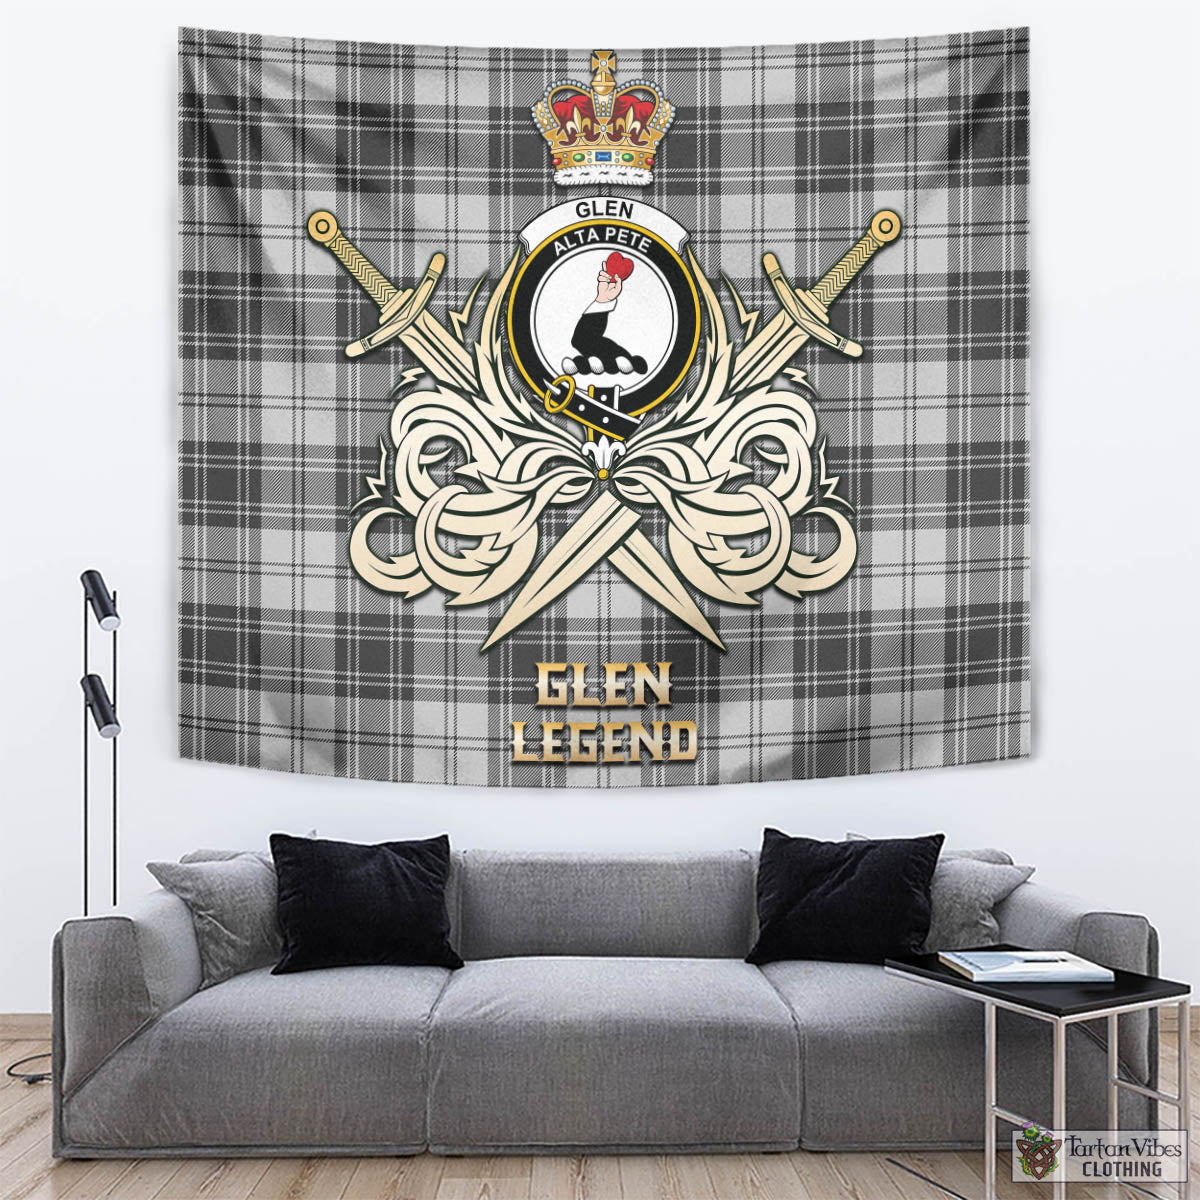 Tartan Vibes Clothing Glen Tartan Tapestry with Clan Crest and the Golden Sword of Courageous Legacy